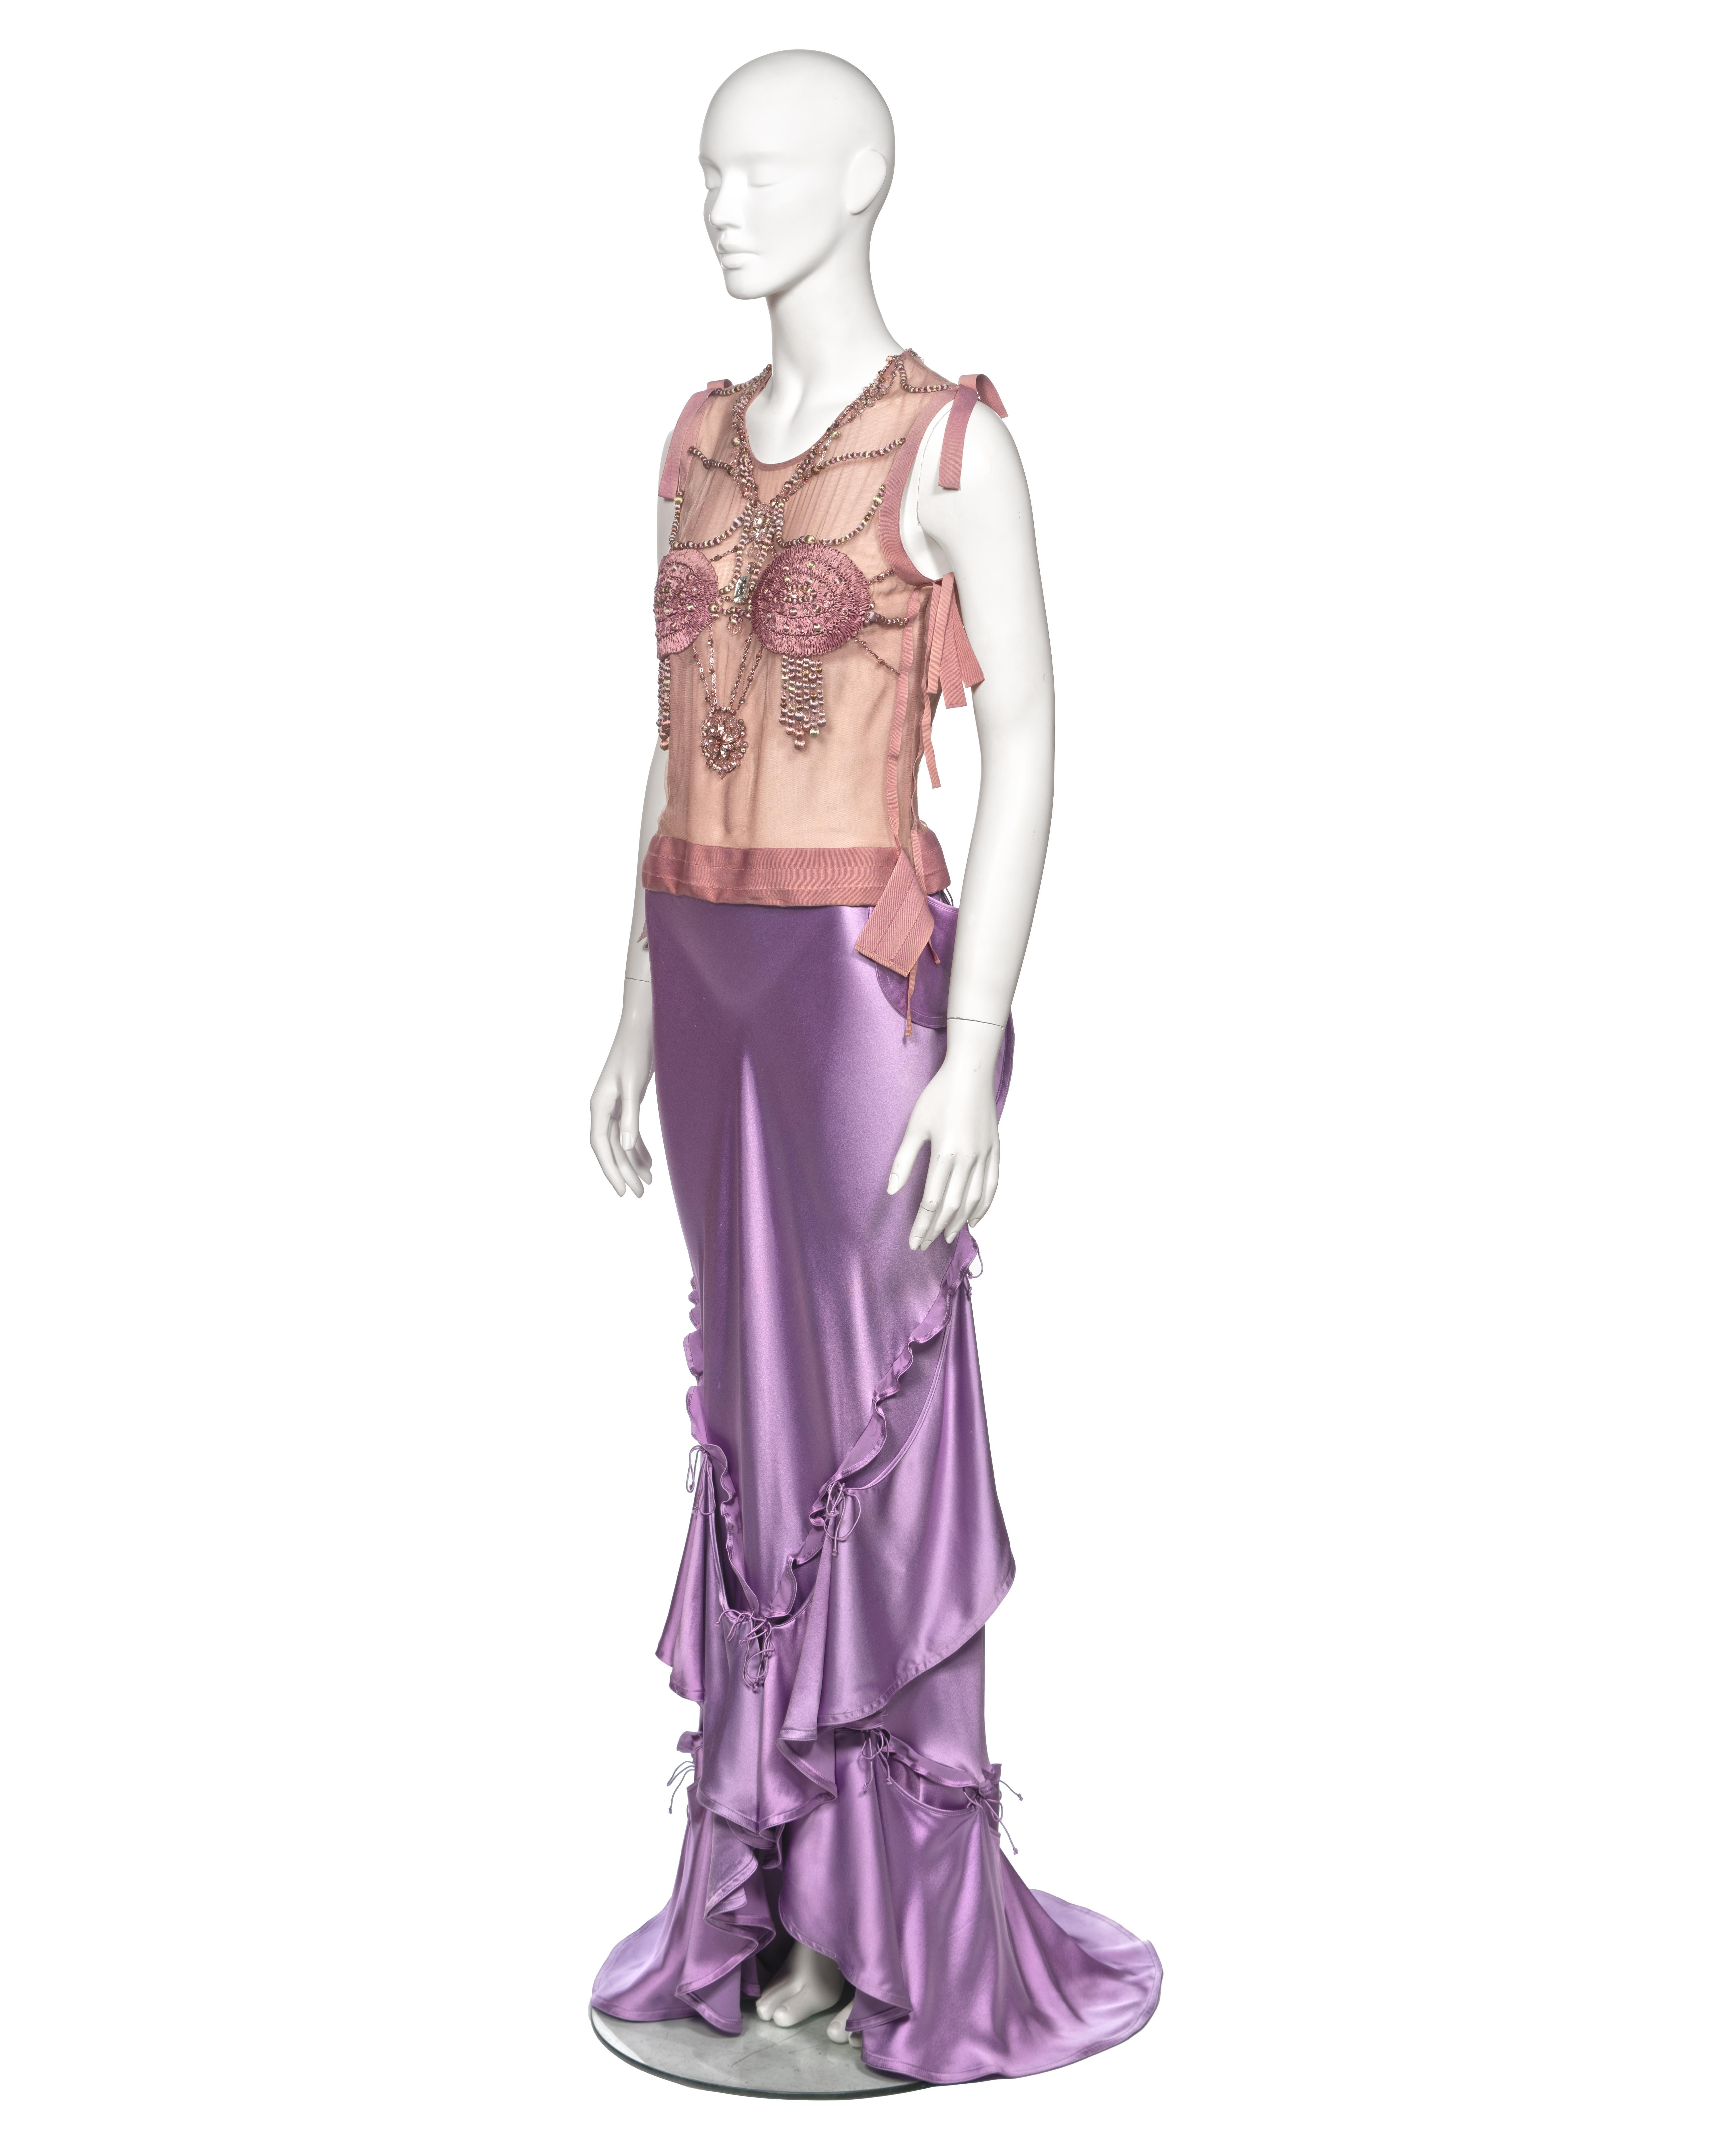 Yves Saint Laurent by Tom Ford Embellished Top and Silk Skirt Ensemble, fw 2003 12